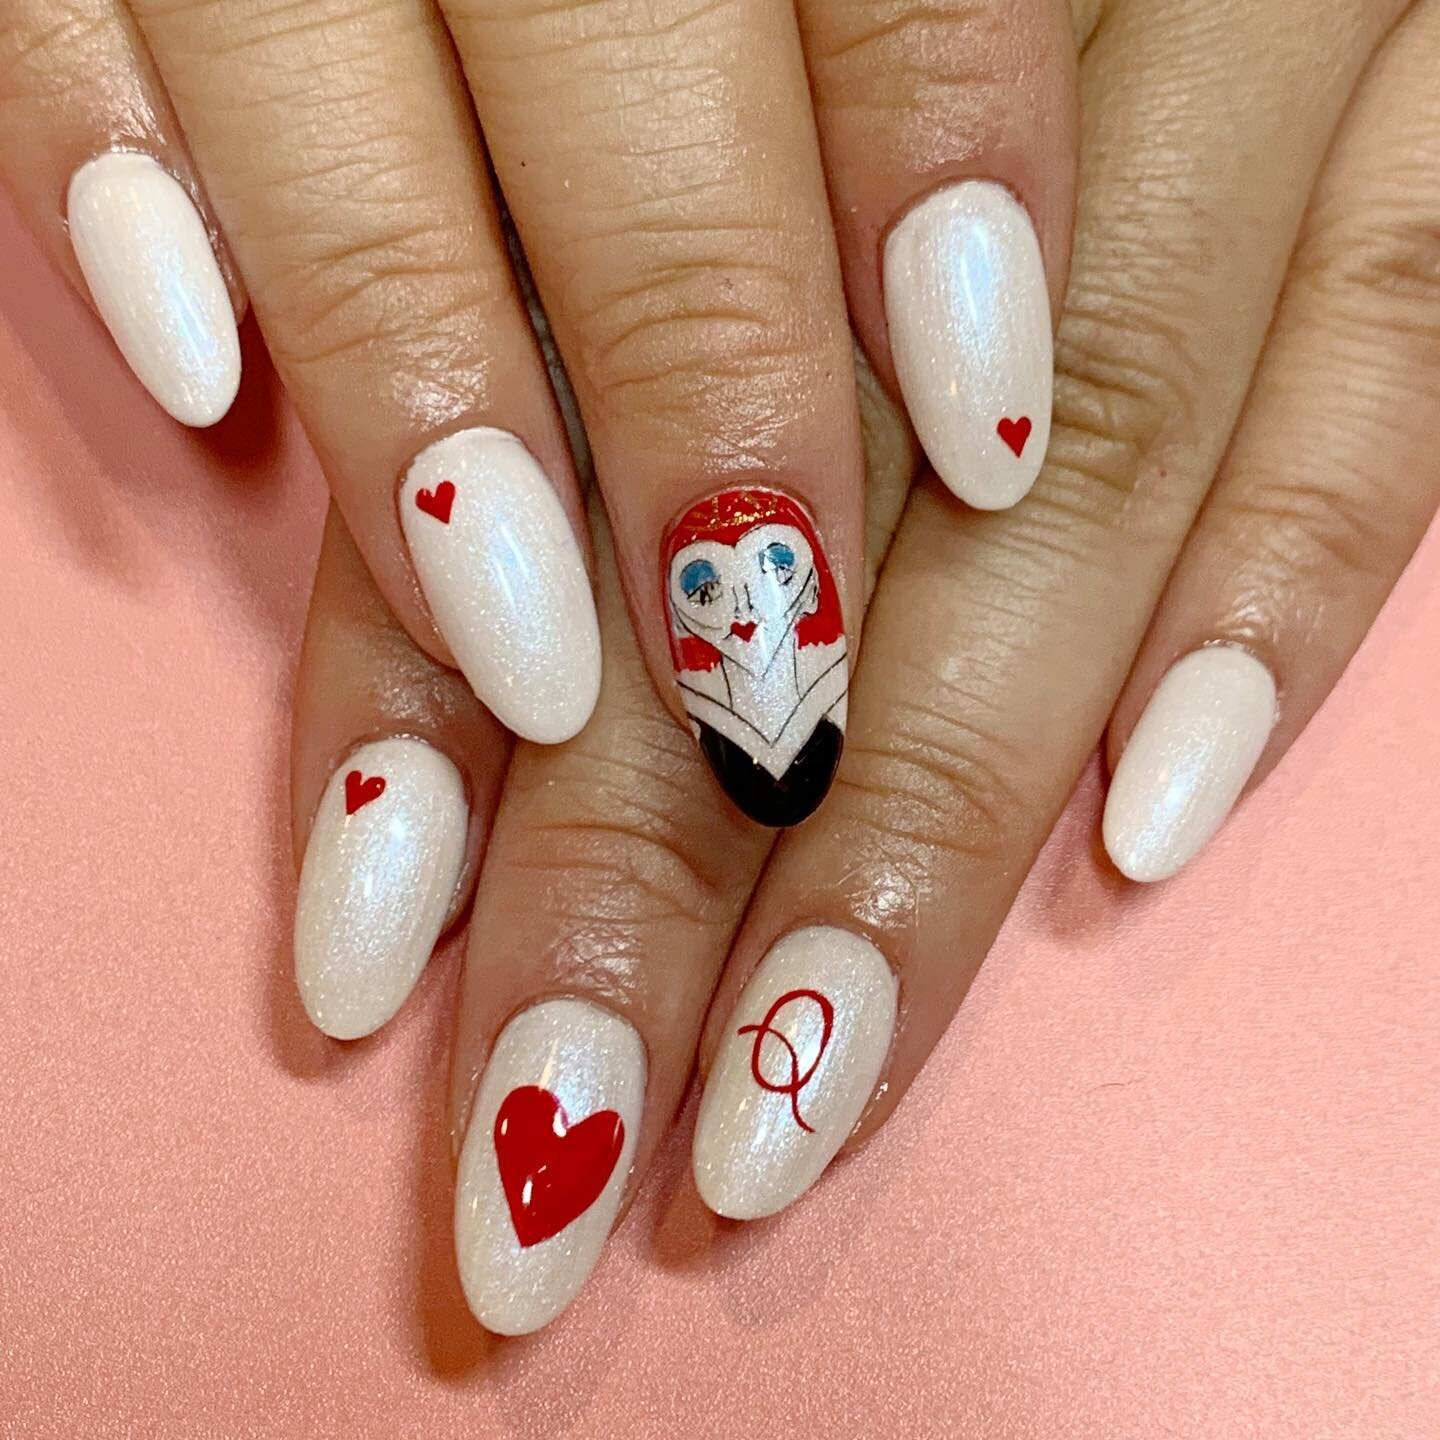 👑 of ❤️s handpainted details 🥰! #halloweennails #thecosmostudio